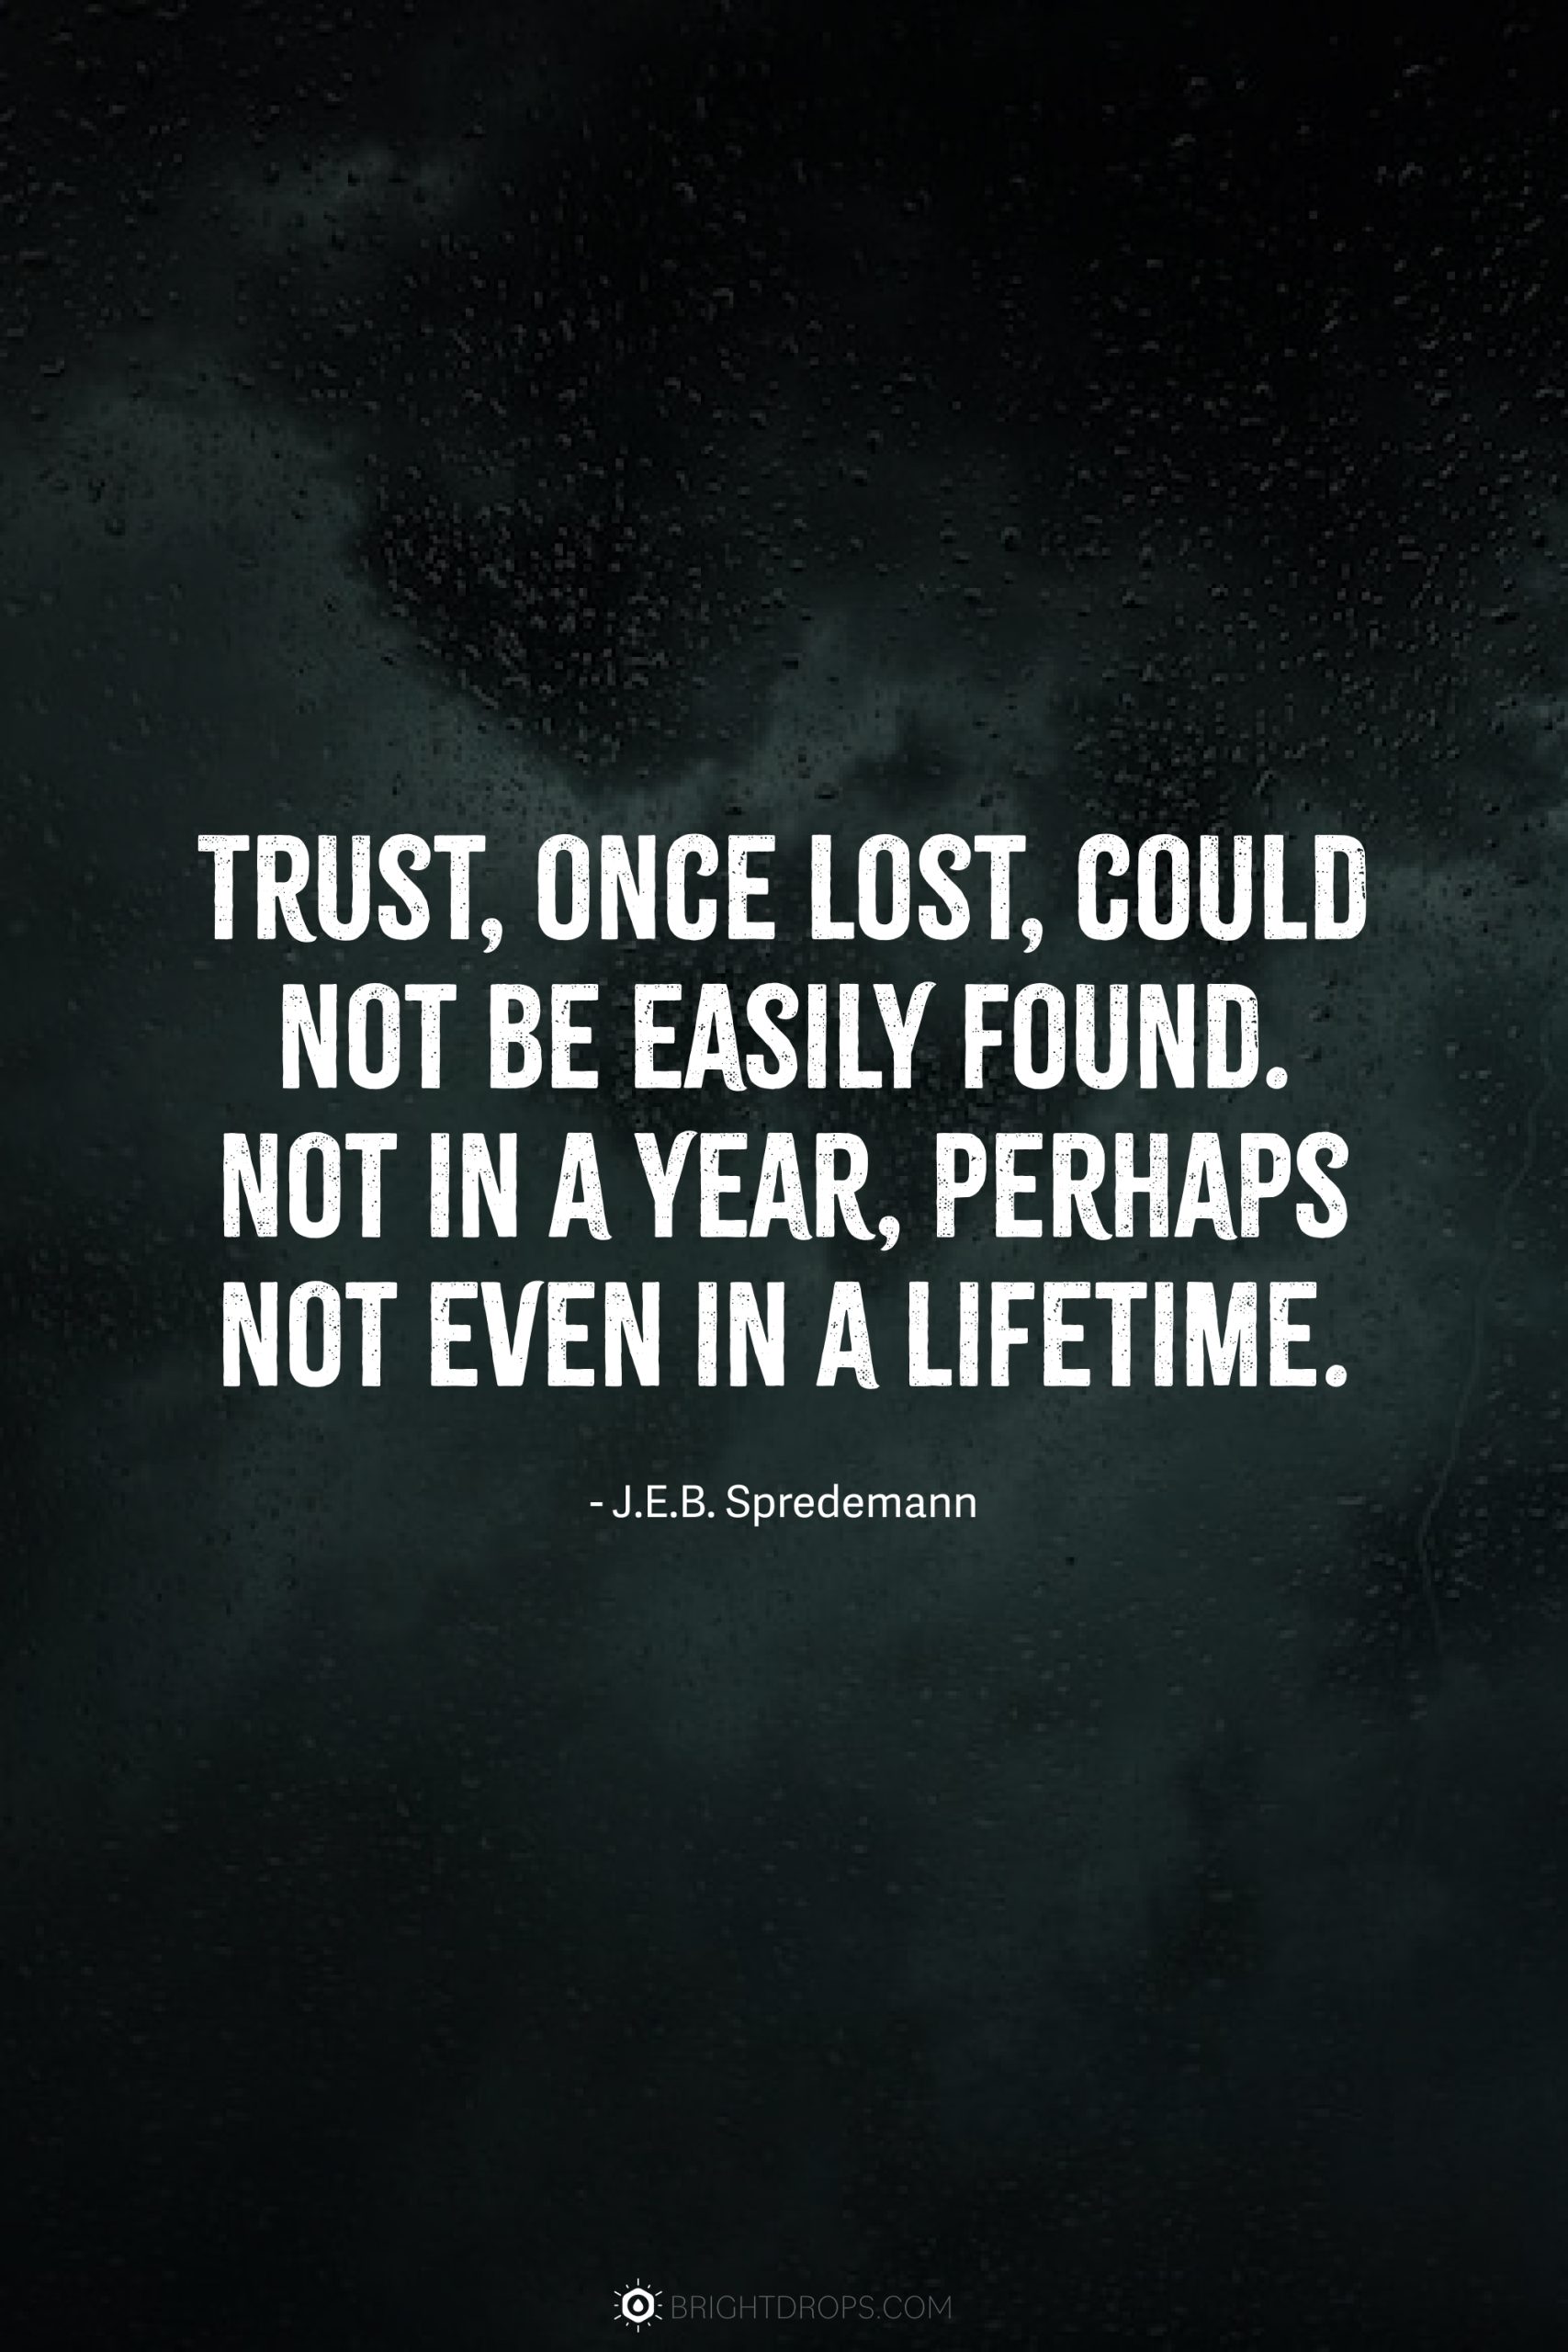 Trust, once lost, could not be easily found. Not in a year, perhaps not even in a lifetime.